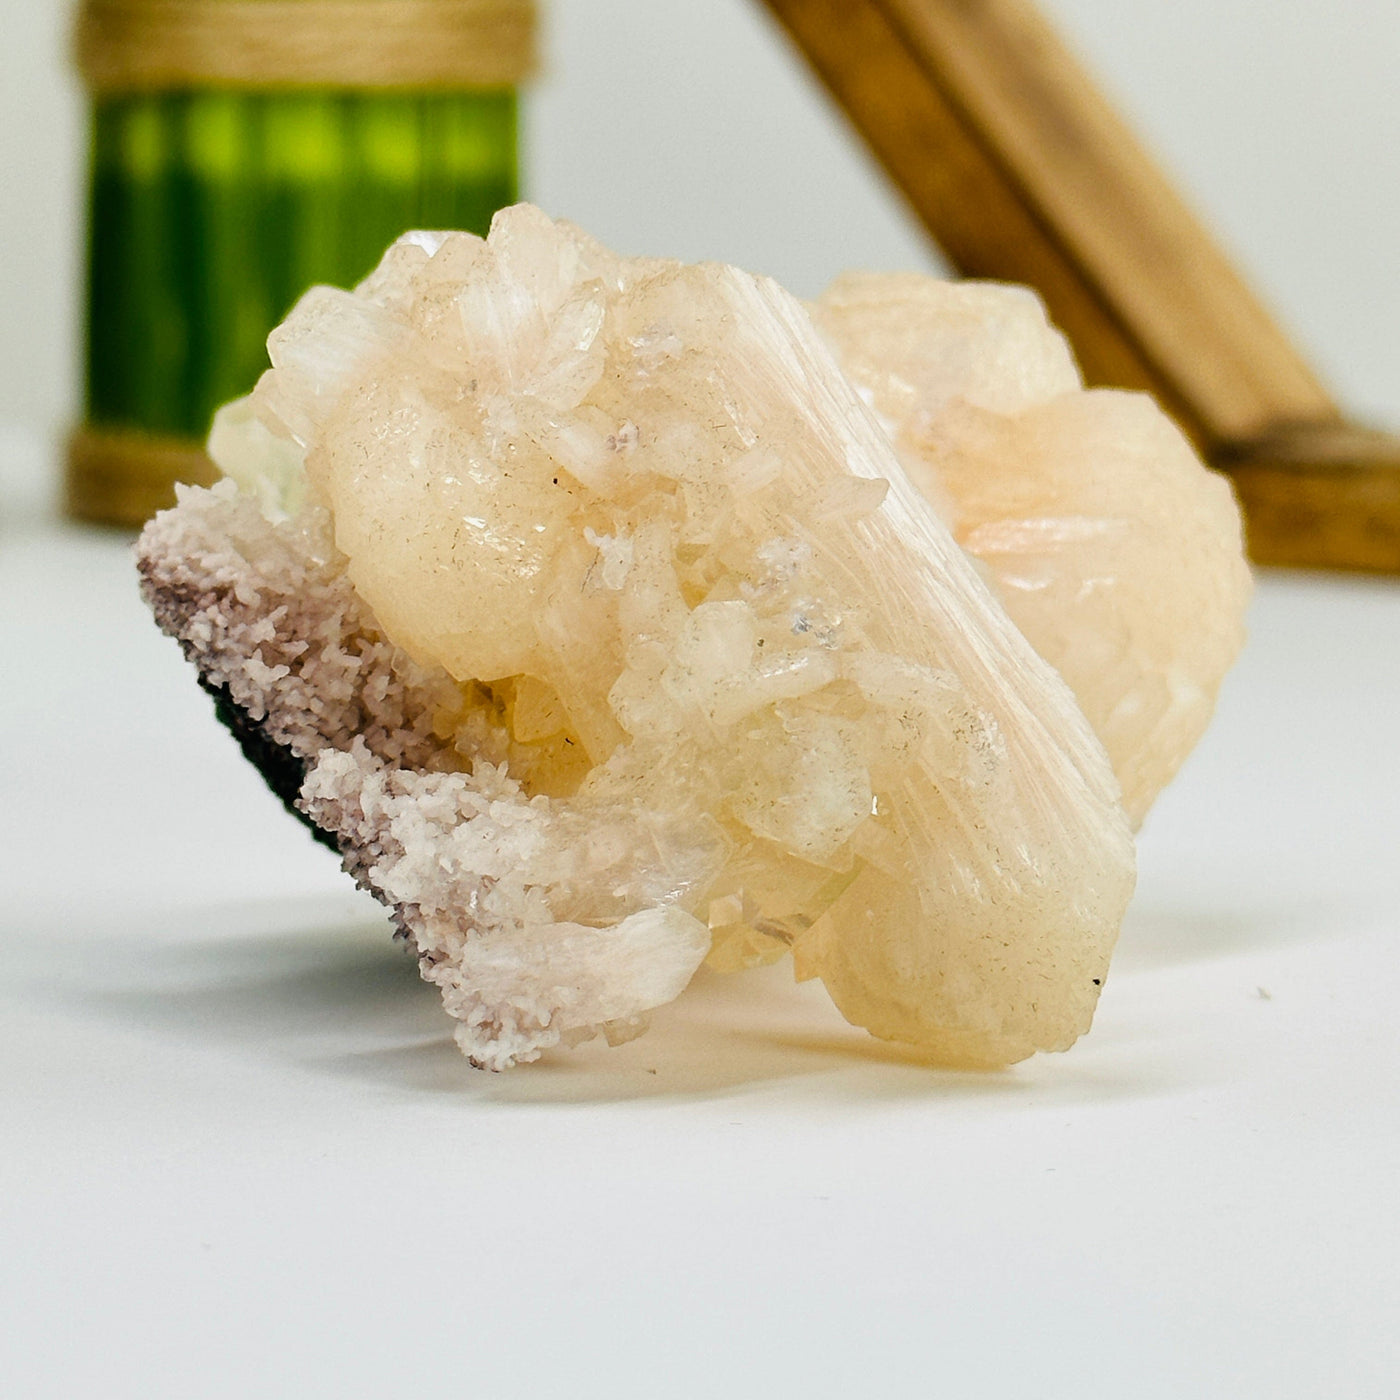 apophyllite with calcite with decorations in the background